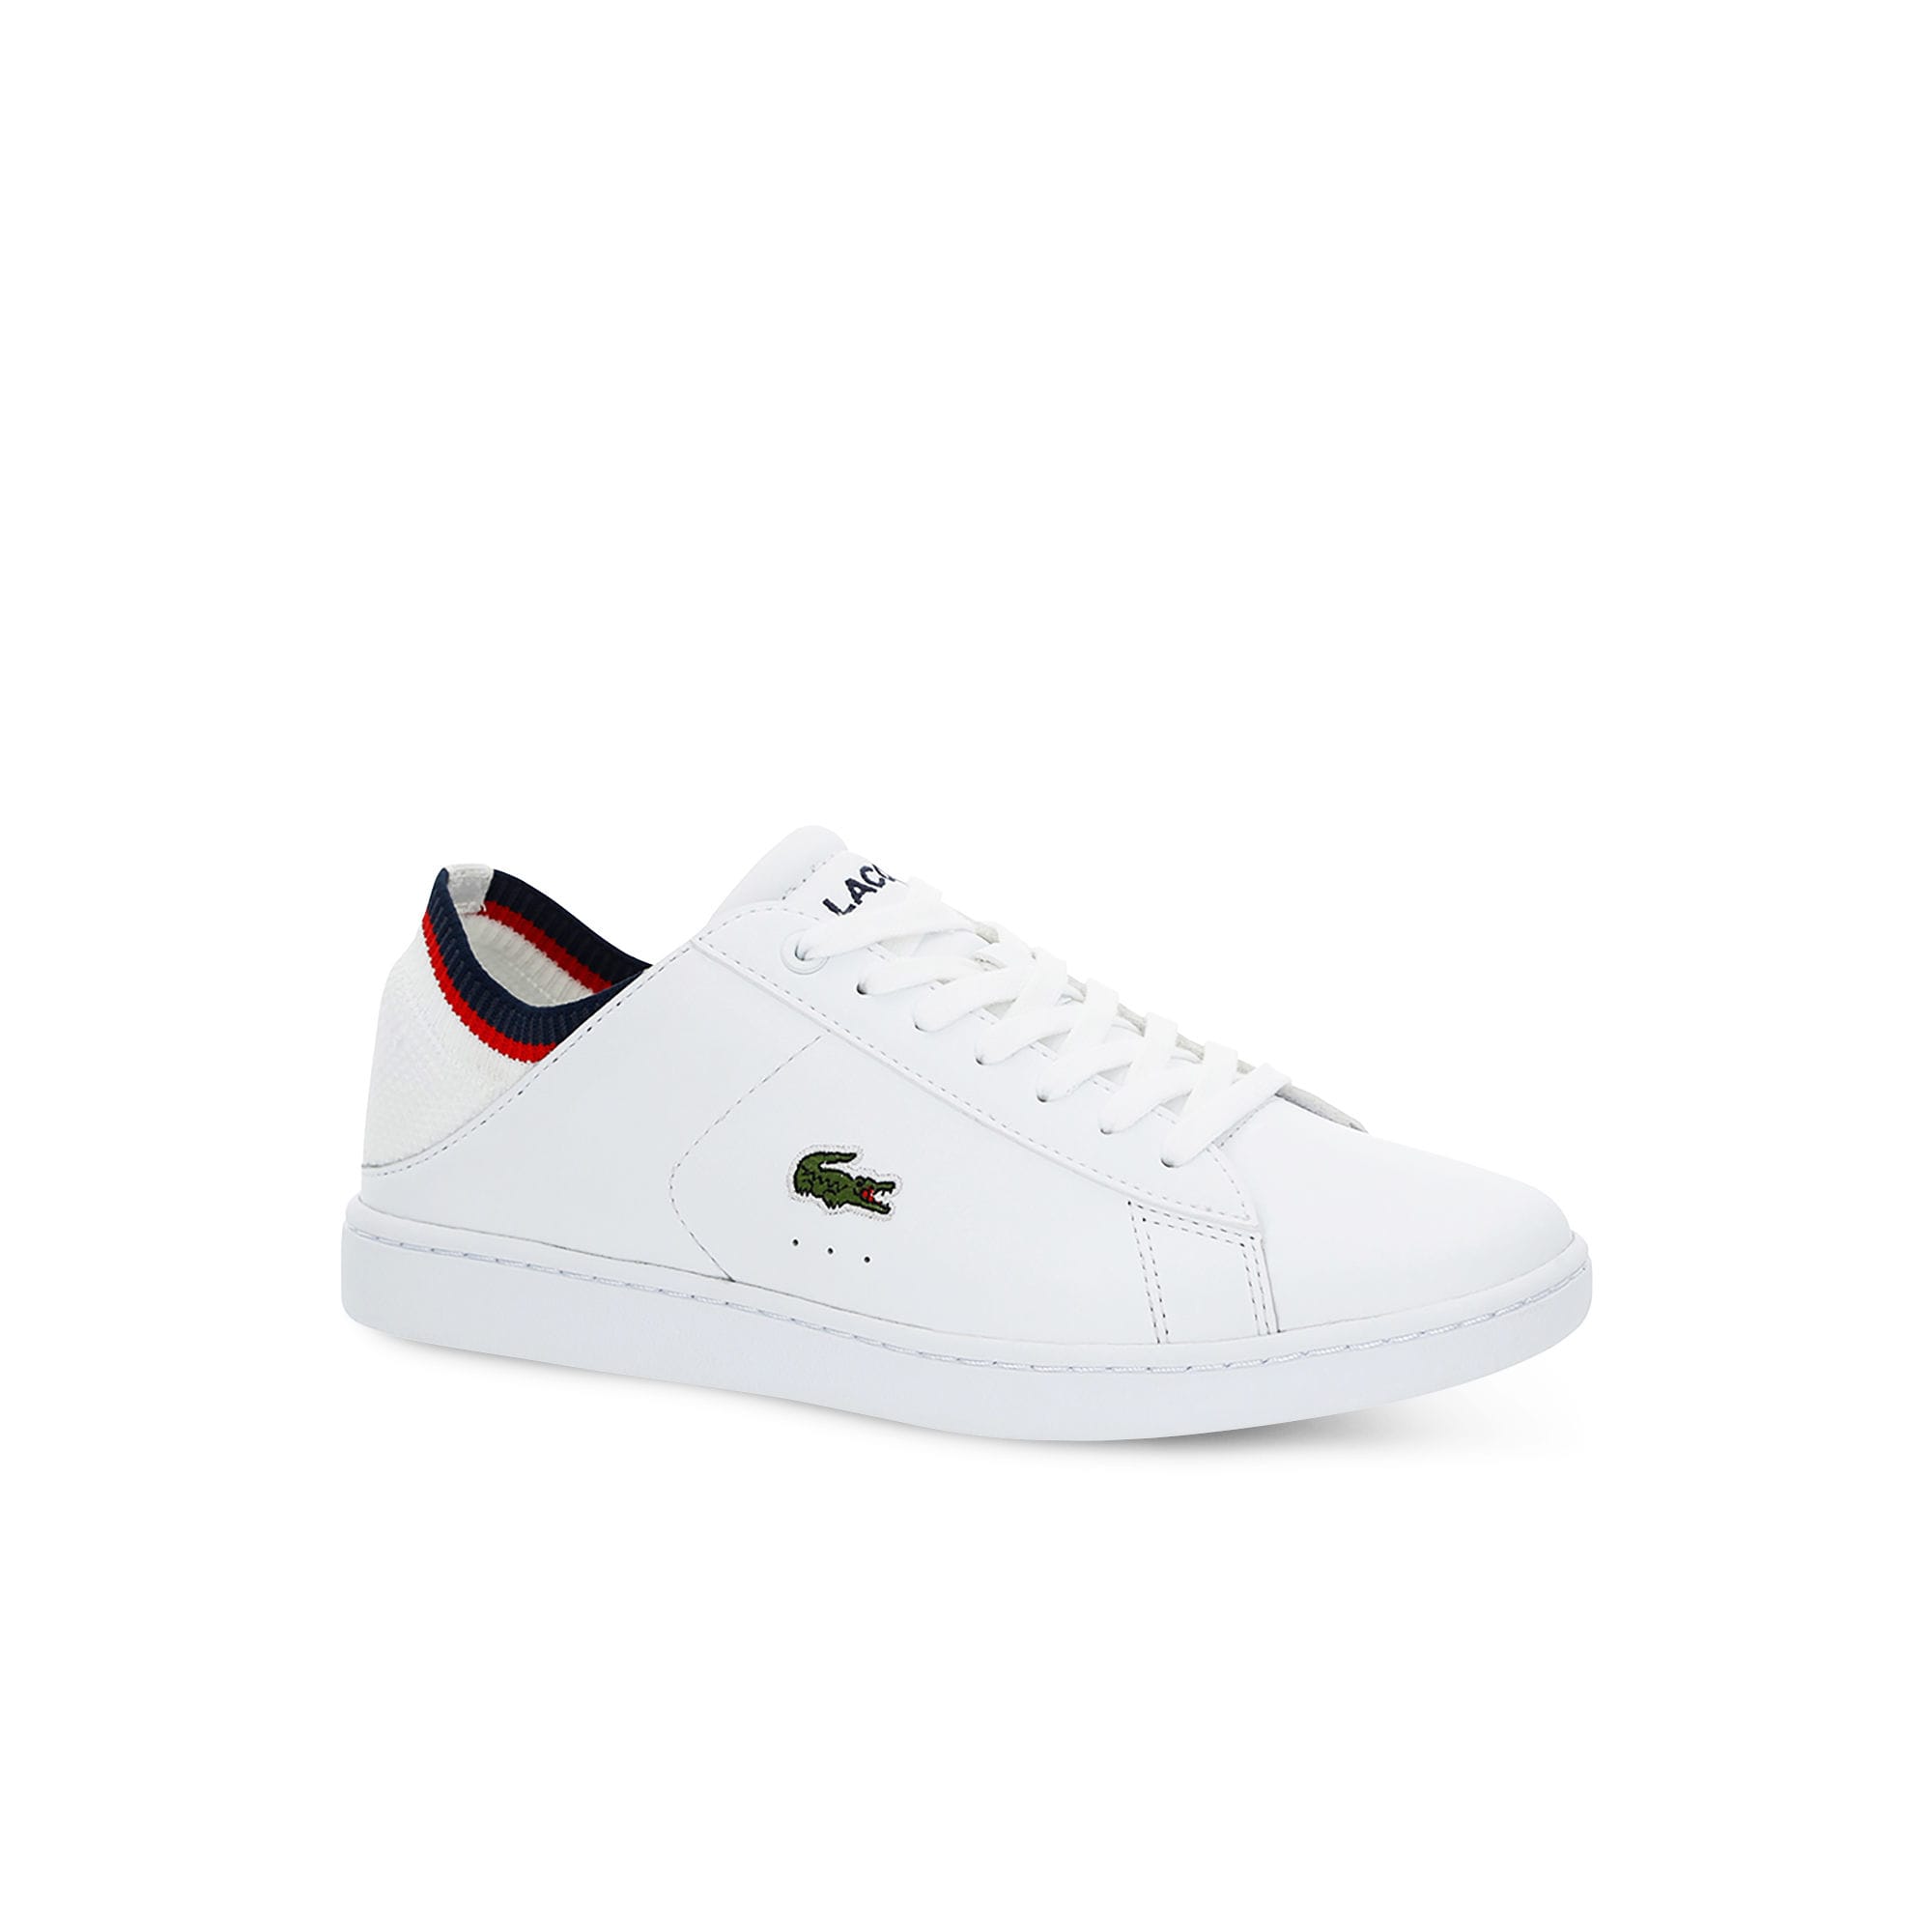 30% Off Entire Store + Free Shipping at Lacoste - APEX DEALS